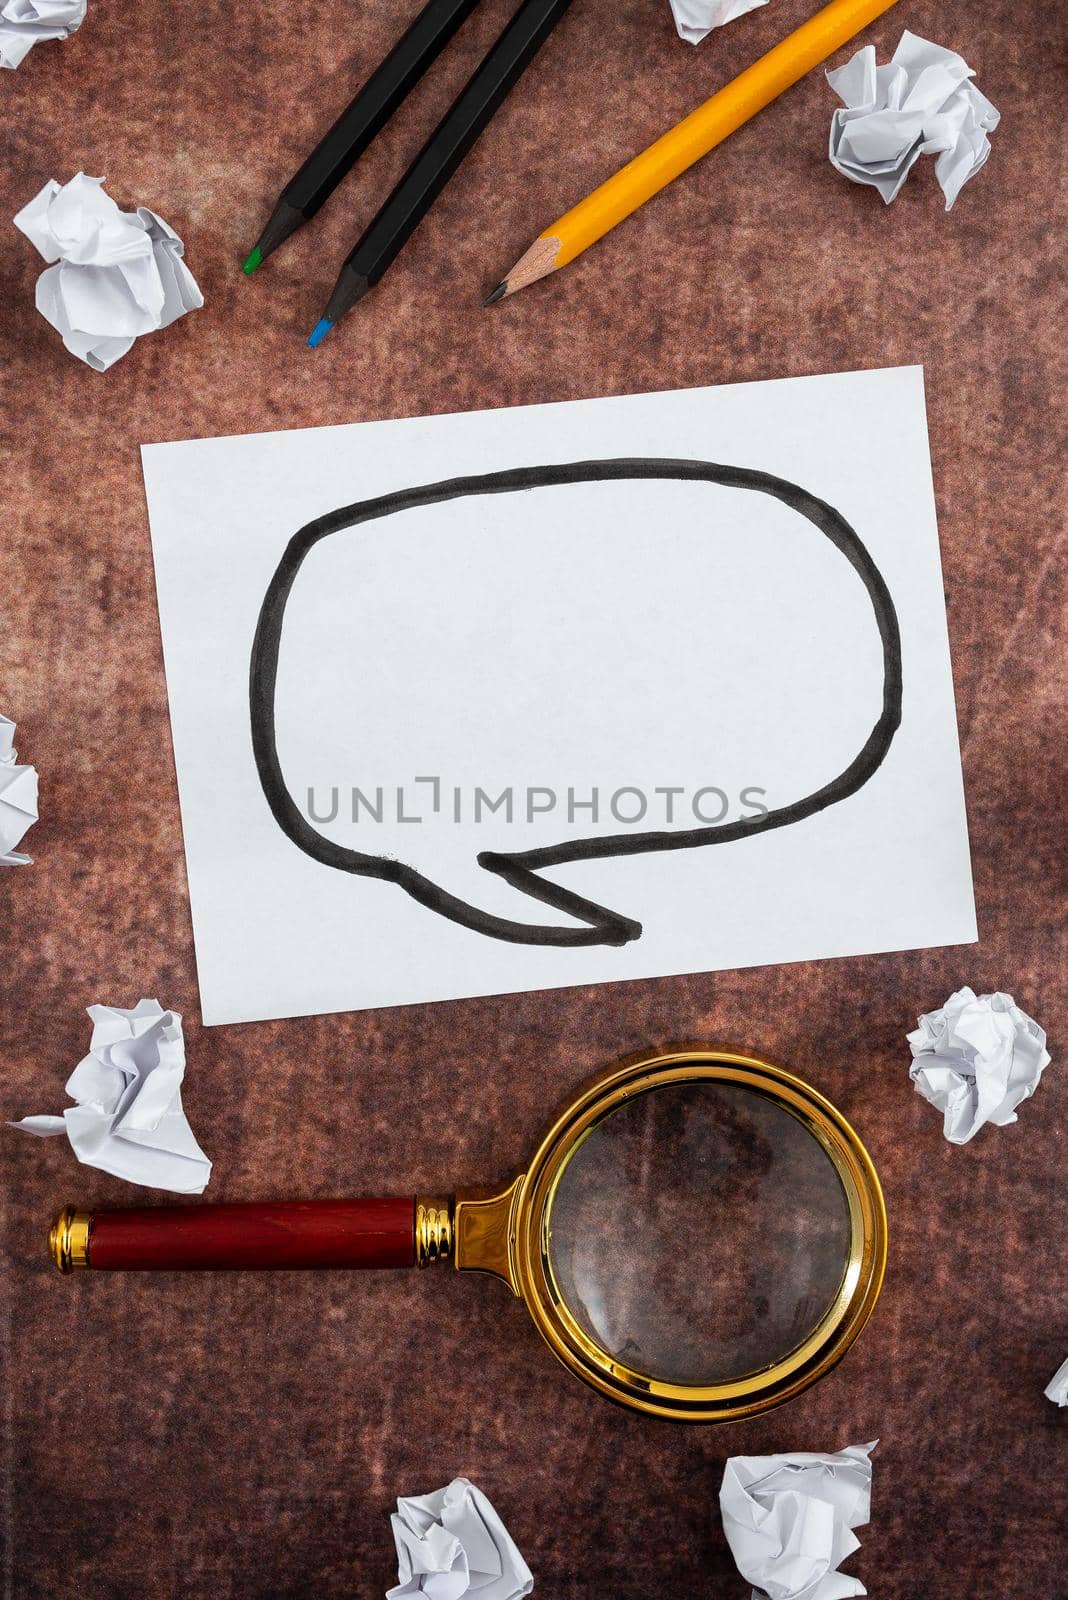 Paper With Speech Bubble Drawing, Magnifying Glass And Pencil Surrounded With Crumpled Papers Over Wood. It Is Representing Planning And Brainstorming New Ideas For Business. by nialowwa